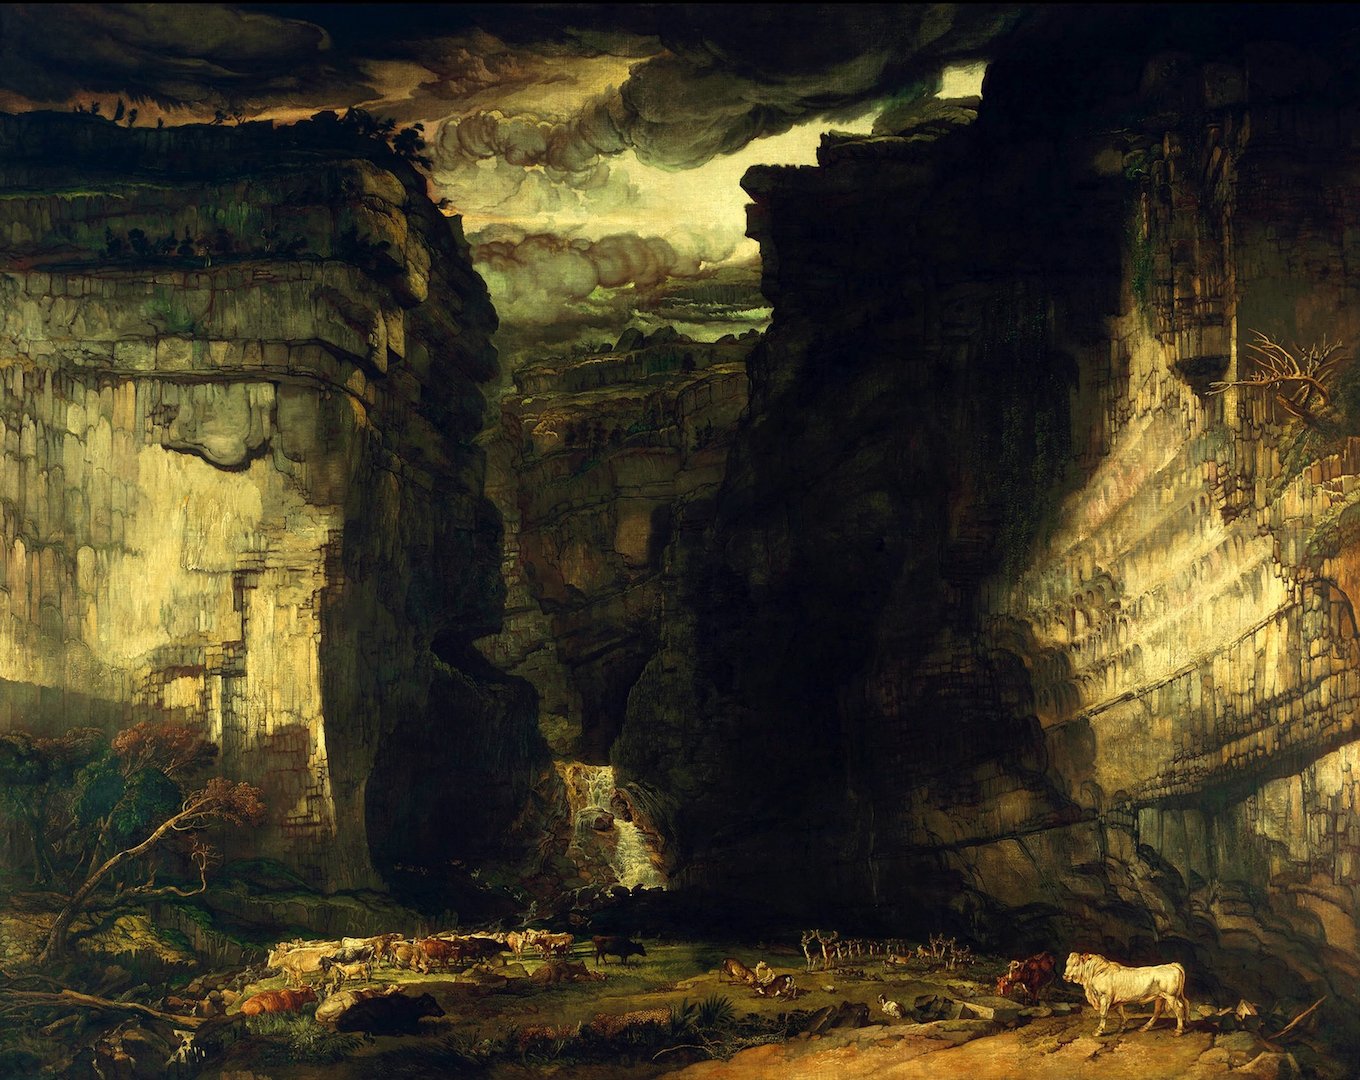 James Ward - Gordale Scar (A View of Gordale, in the Manor of East Malham in Craven, Yorkshire, the Property of Lord Ribblesdale), Tate Britain